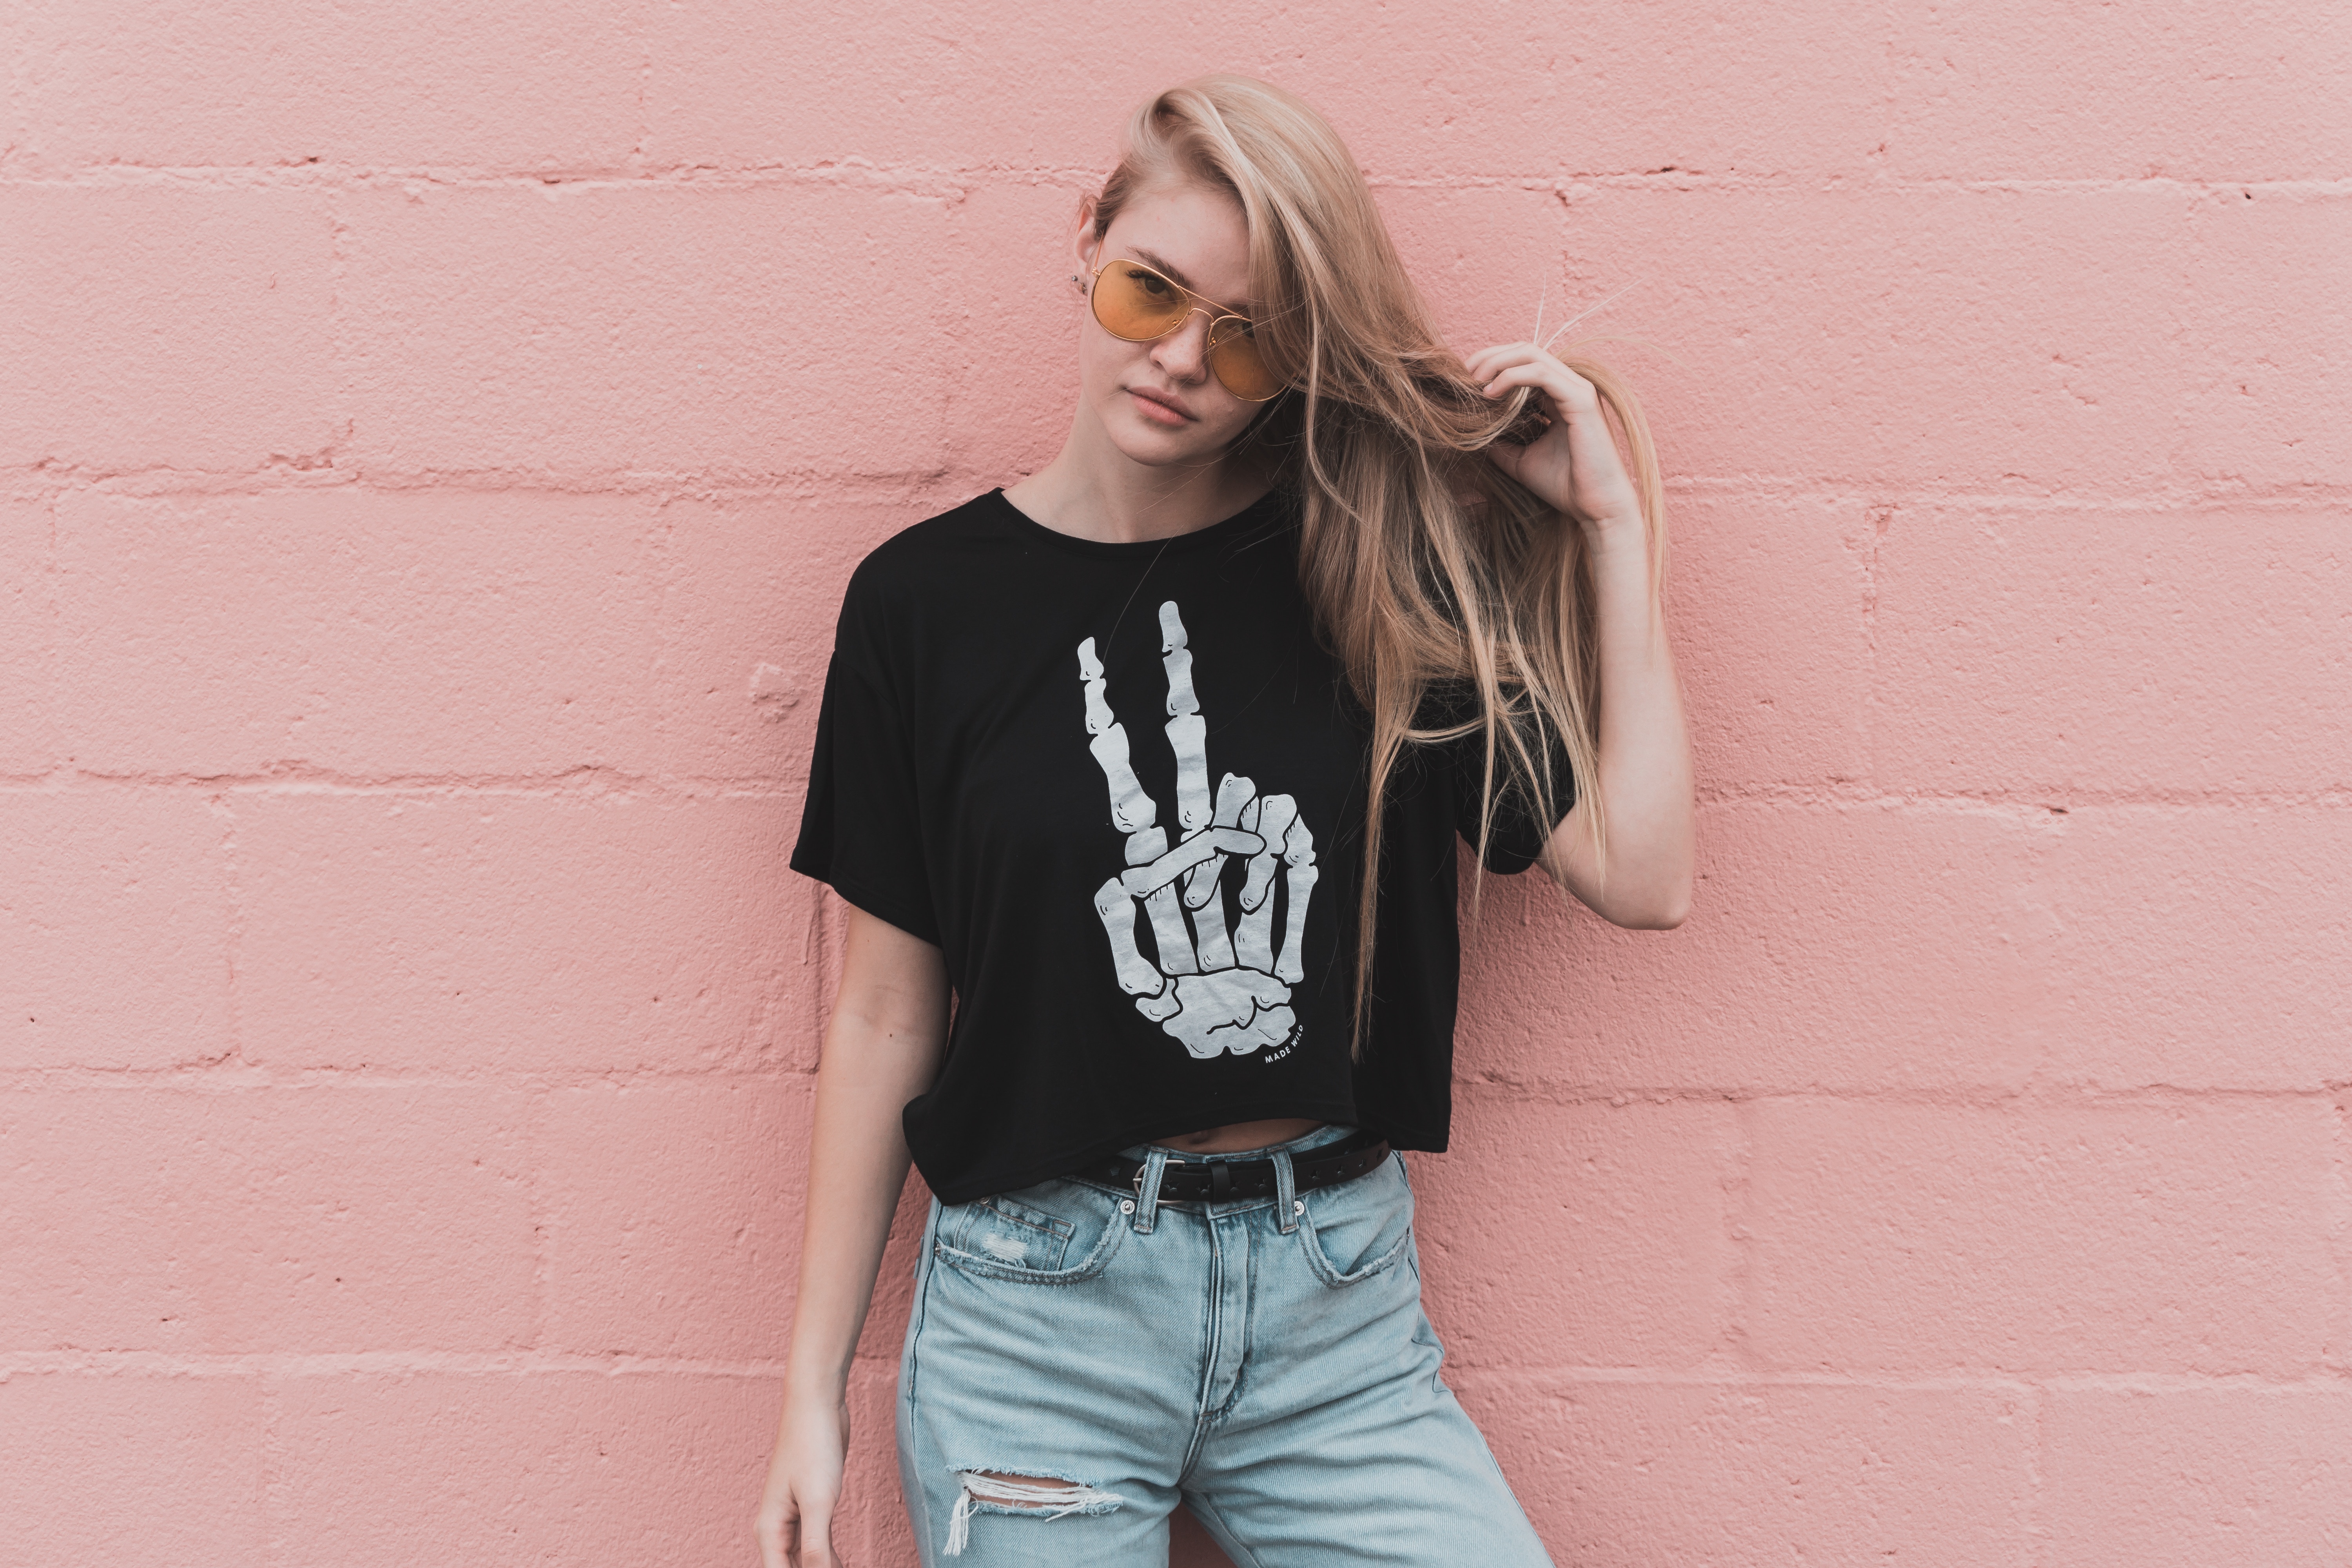 Wall Black T Shirt Jeans Sunglasses Women With Shades 6000x4000